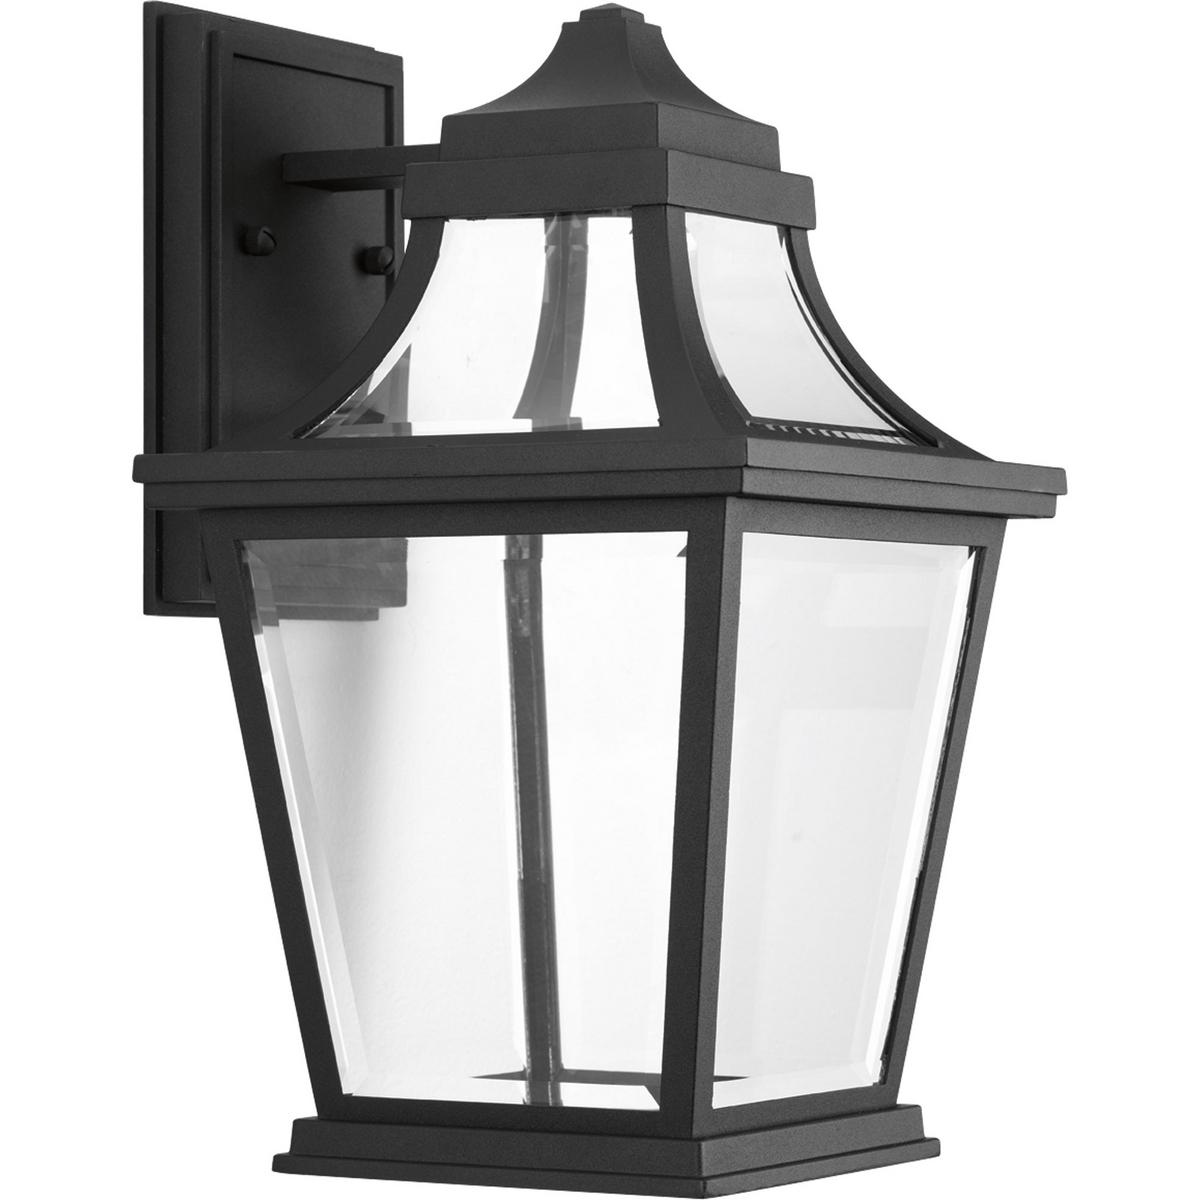 Hubbell P6057-3130K9 Endorse celebrates the traditional form of a gas-powered coach light with illumination from an LED source. The medium wall lantern has a die-cast aluminum, powdered coated frame created and intriguing visual effect with the clear beveled glass. An optiona